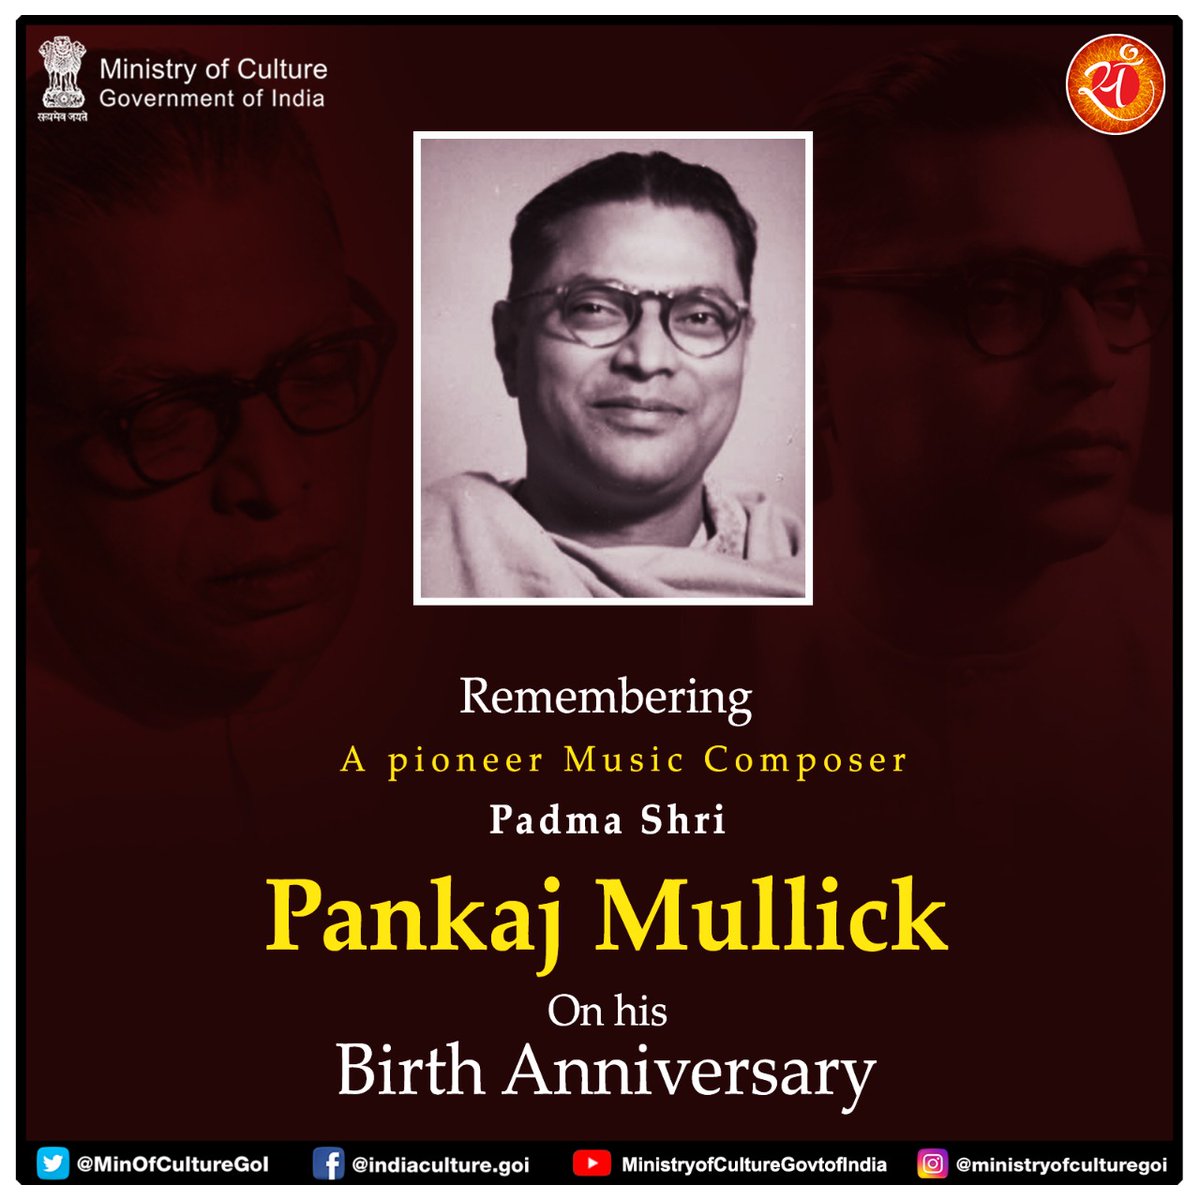 Homage to the pioneer music composer, Singer, Padma Shri #PankajMullick on his Birth Anniversary. He was an early exponent of Rabindra sangeet. He found a music form truly representing the spirit of new India.